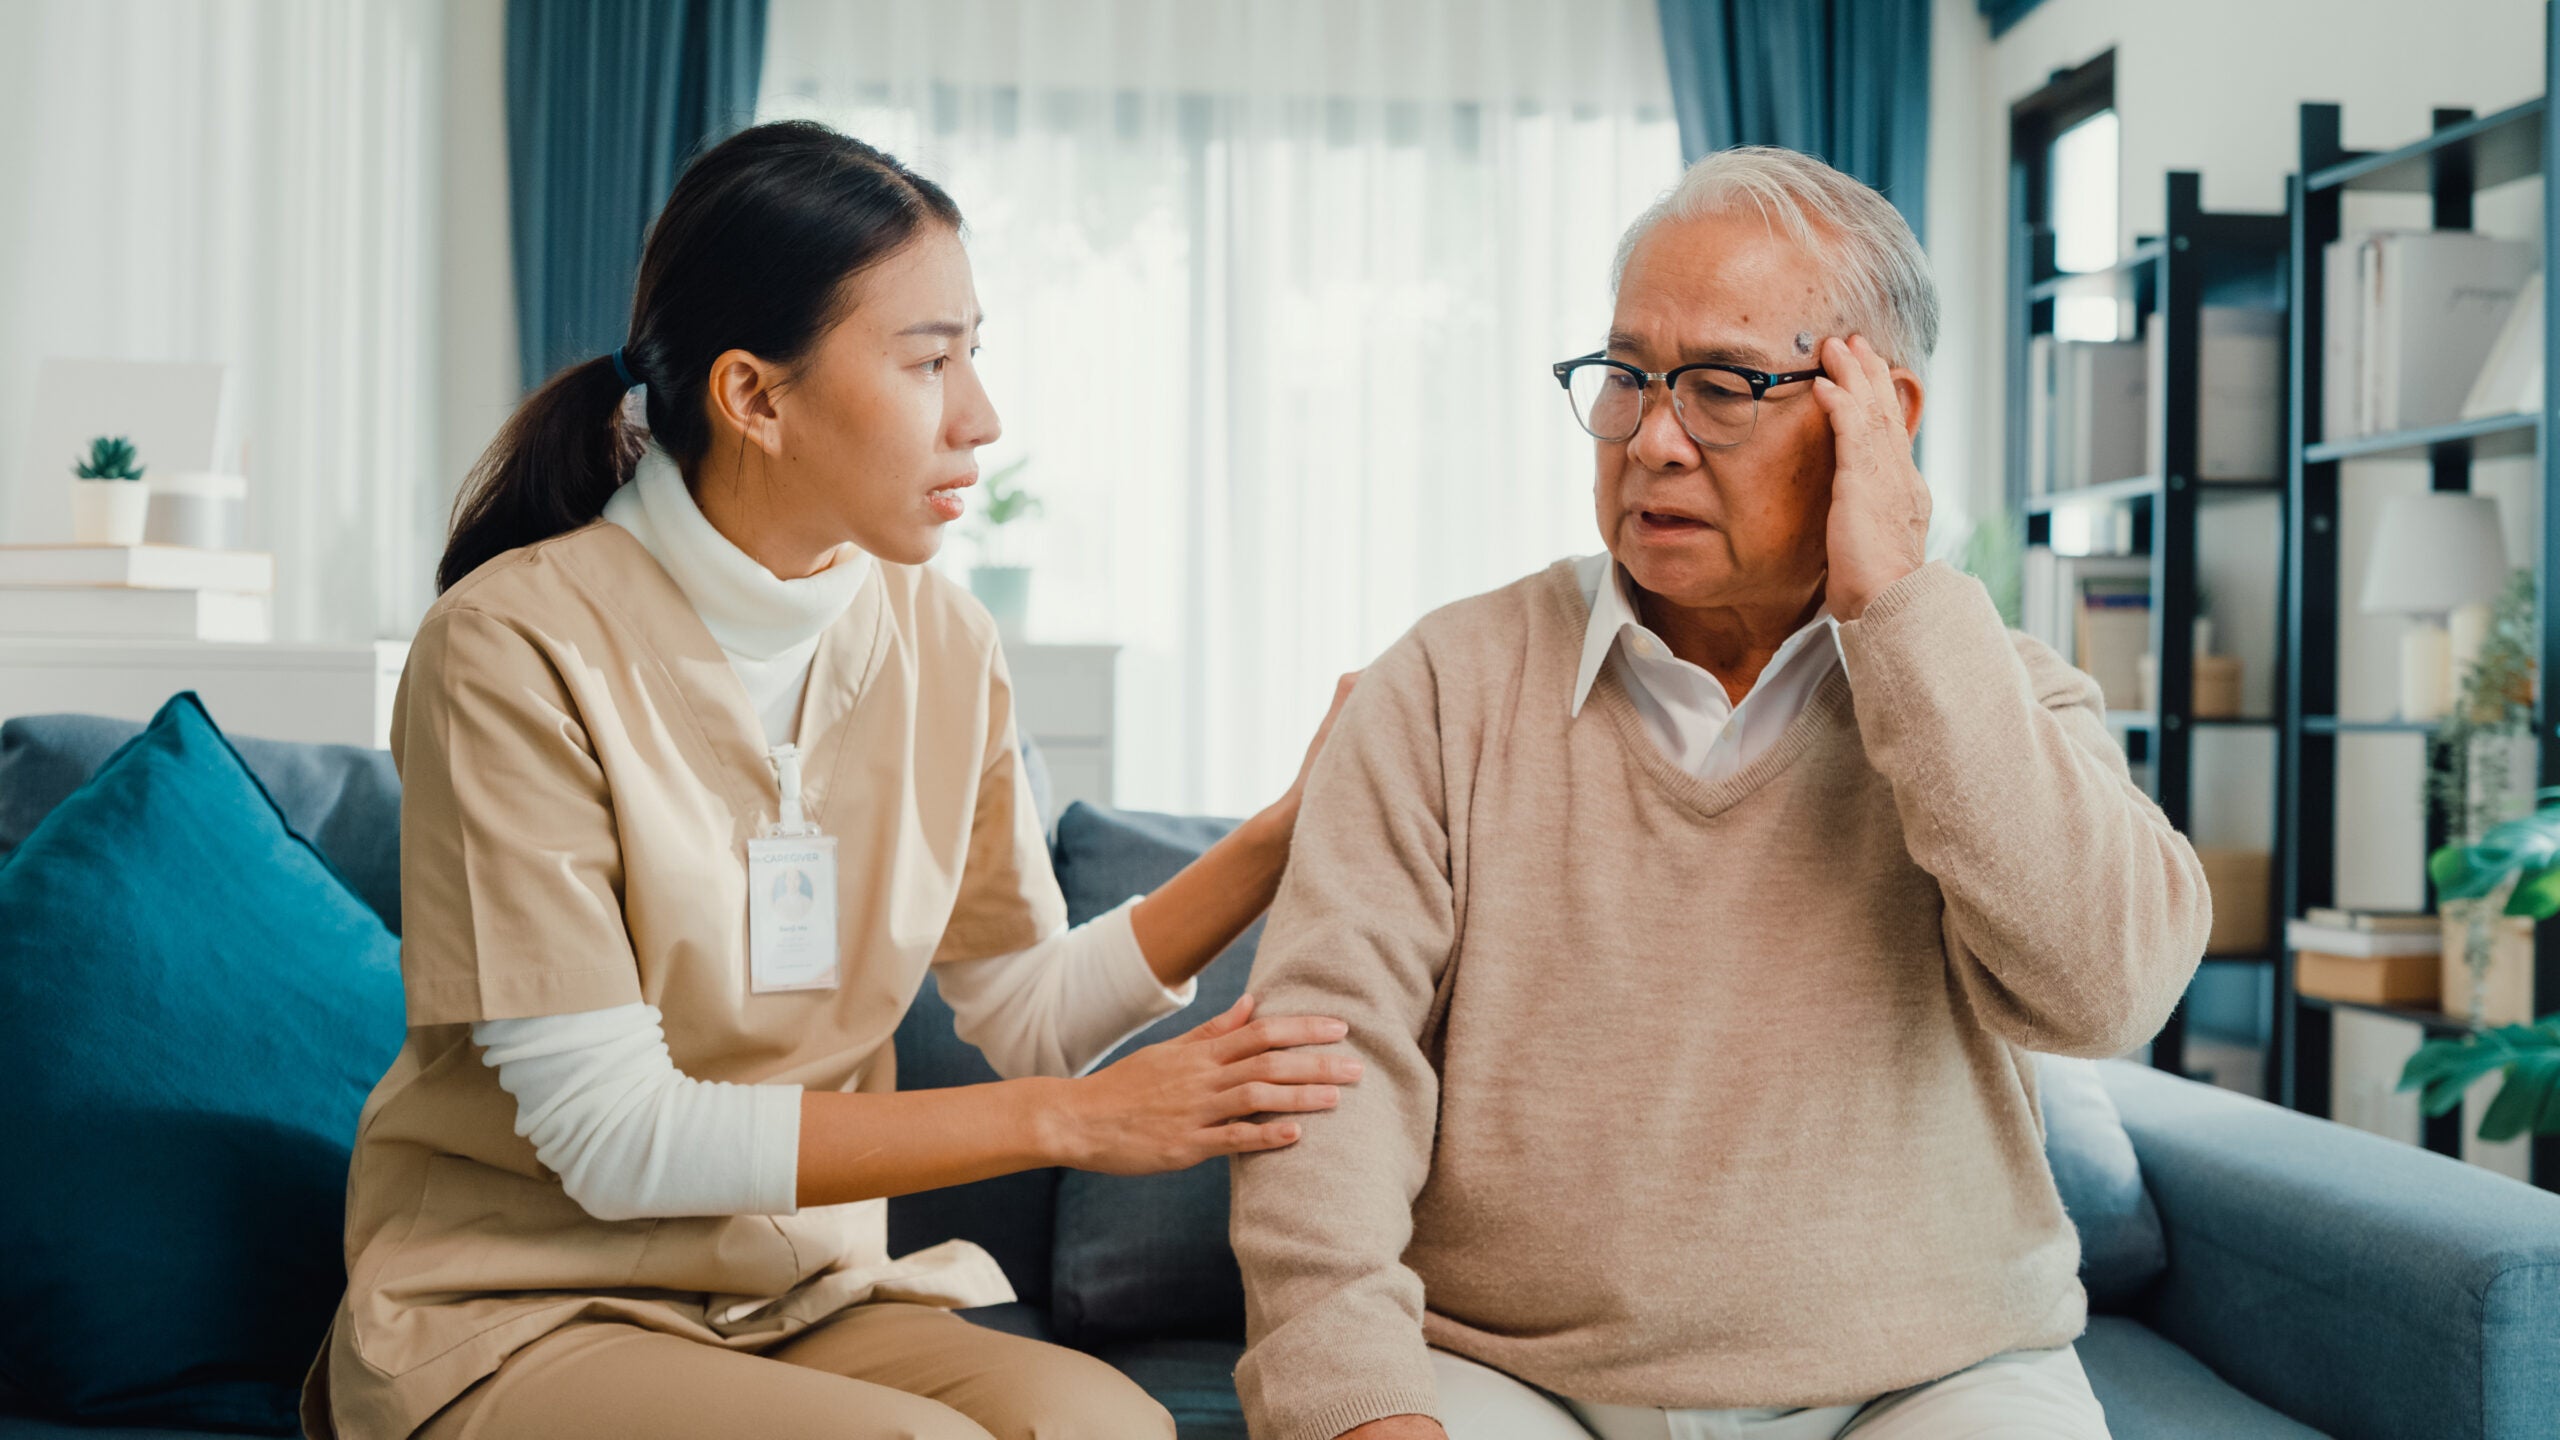 Asian physician wearing beige scrubs consoling her elderly Asian patient